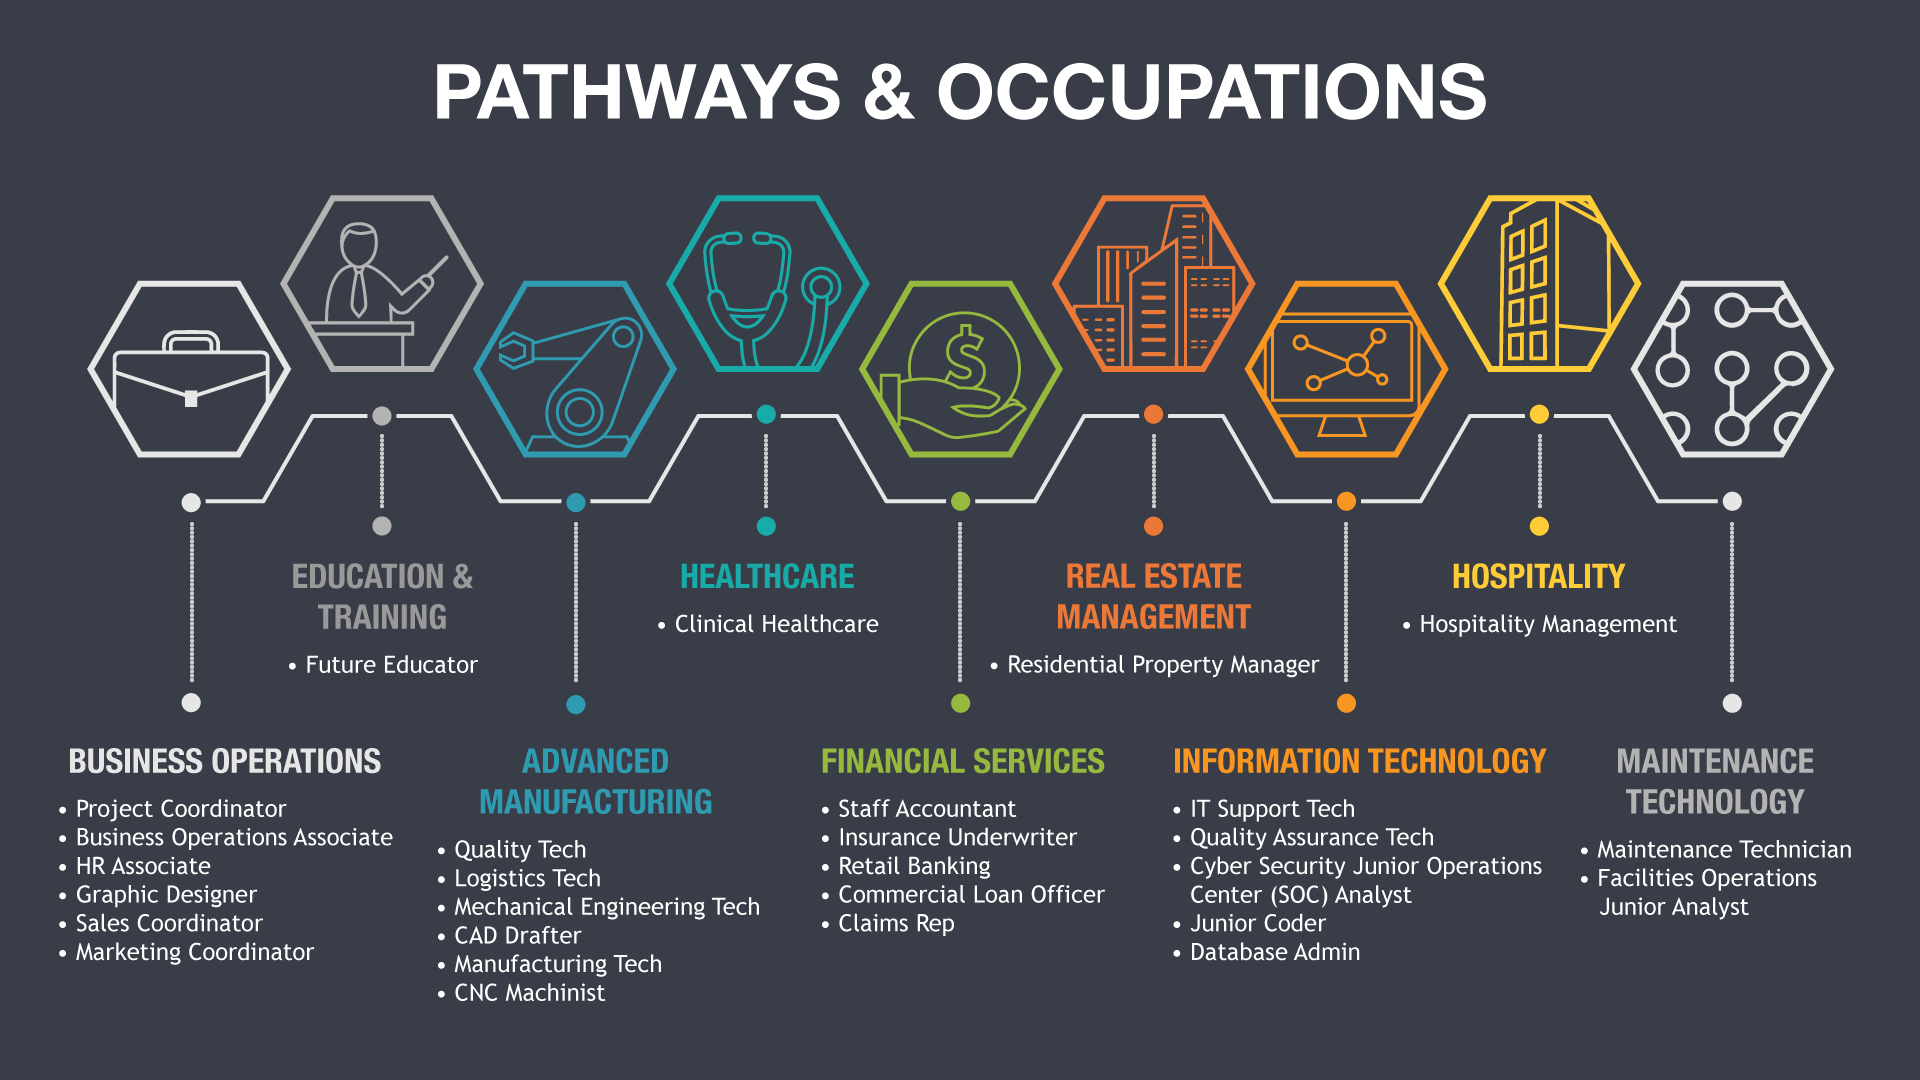 CareerWise's Apprentice Career Pathways and Occupations